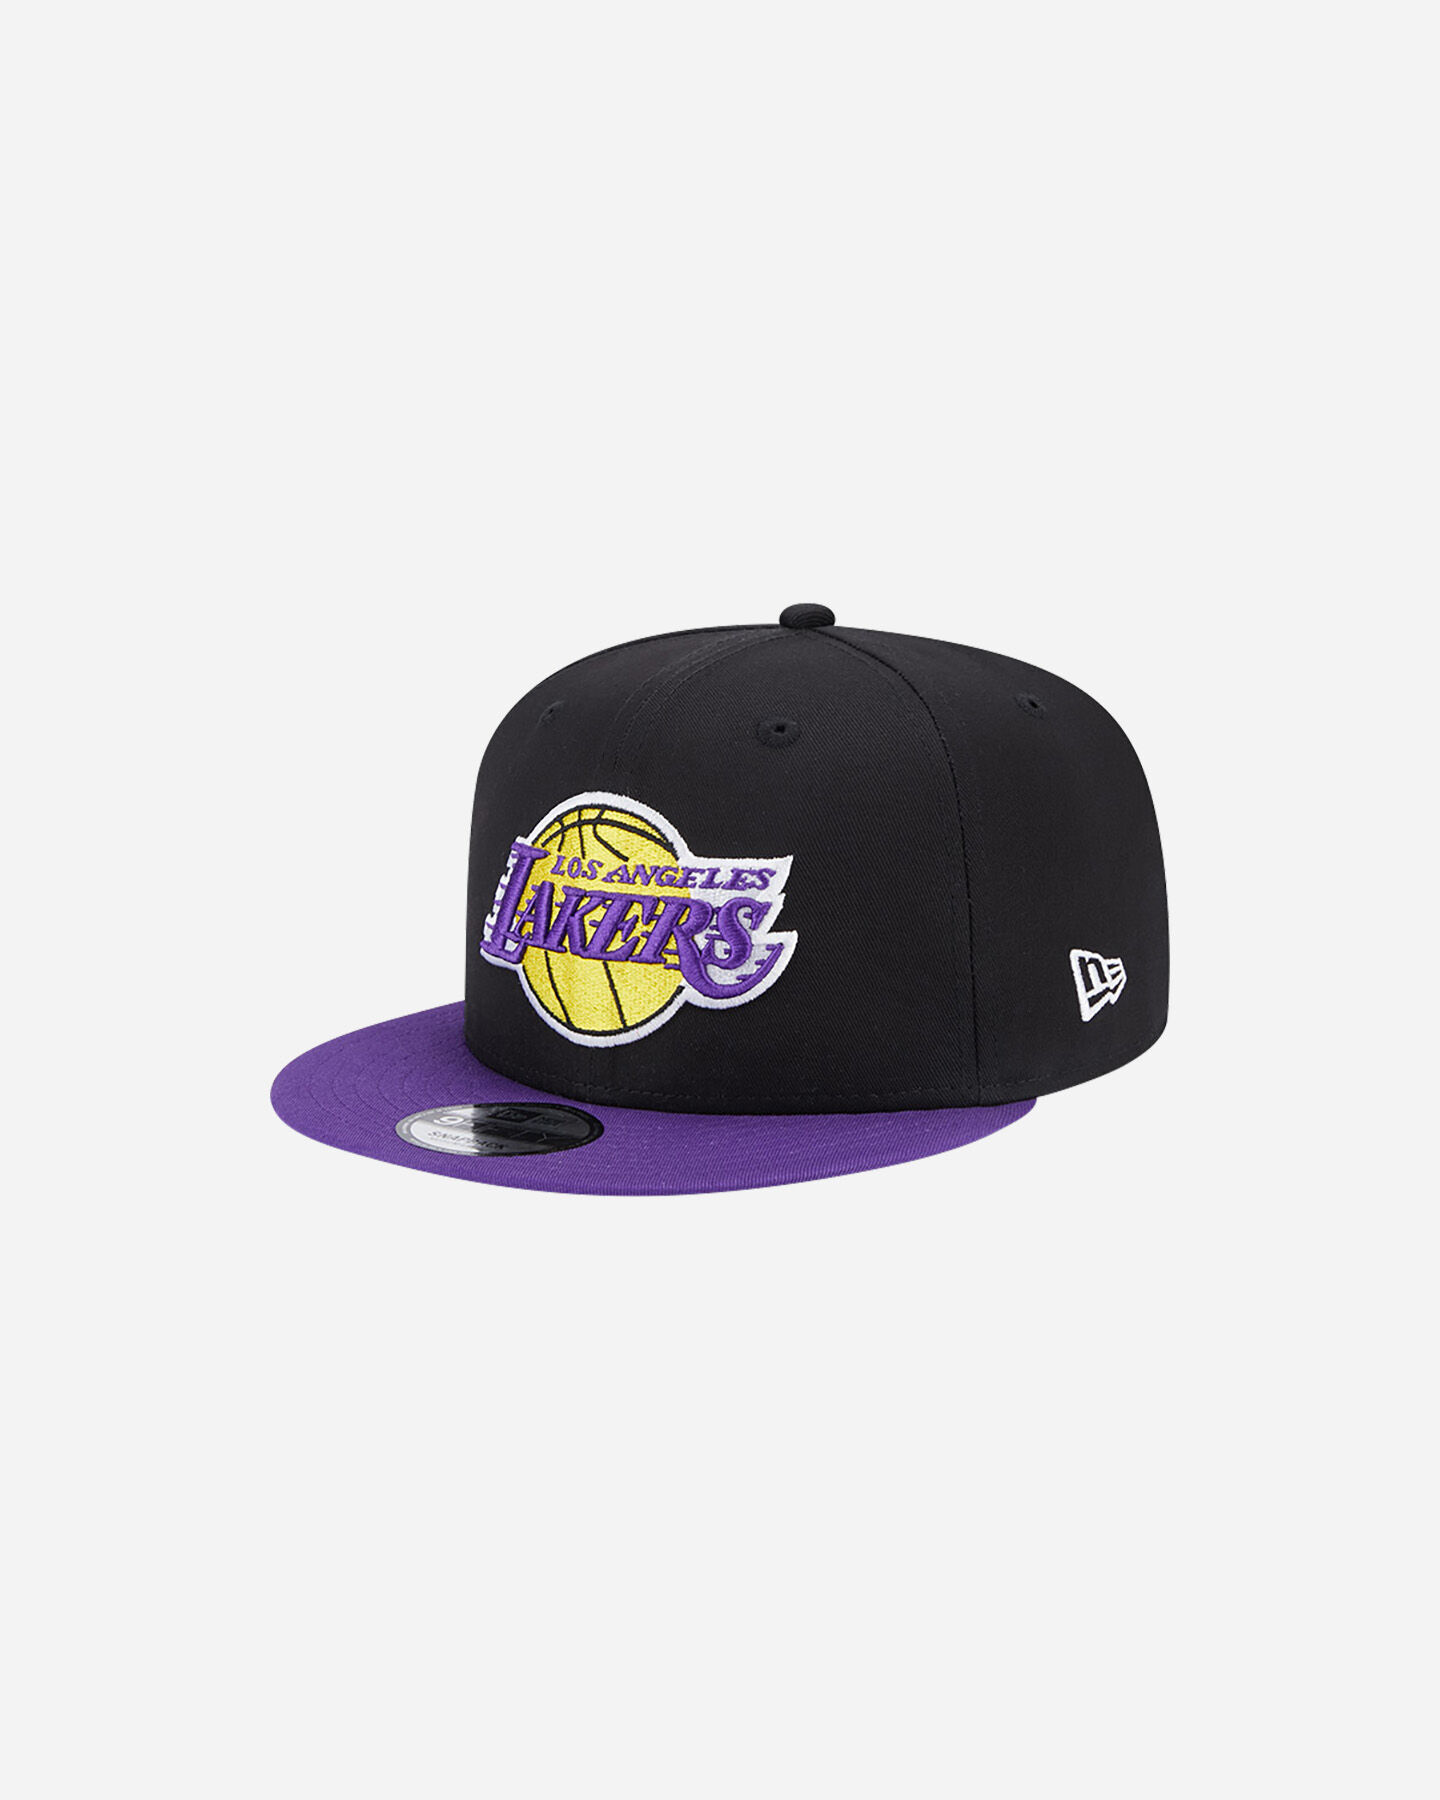  Cappellino NEW ERA 9FIFTY CONTRAST SIDE LOS ANGELES LAKERS  S5606214|001|SM scatto 0